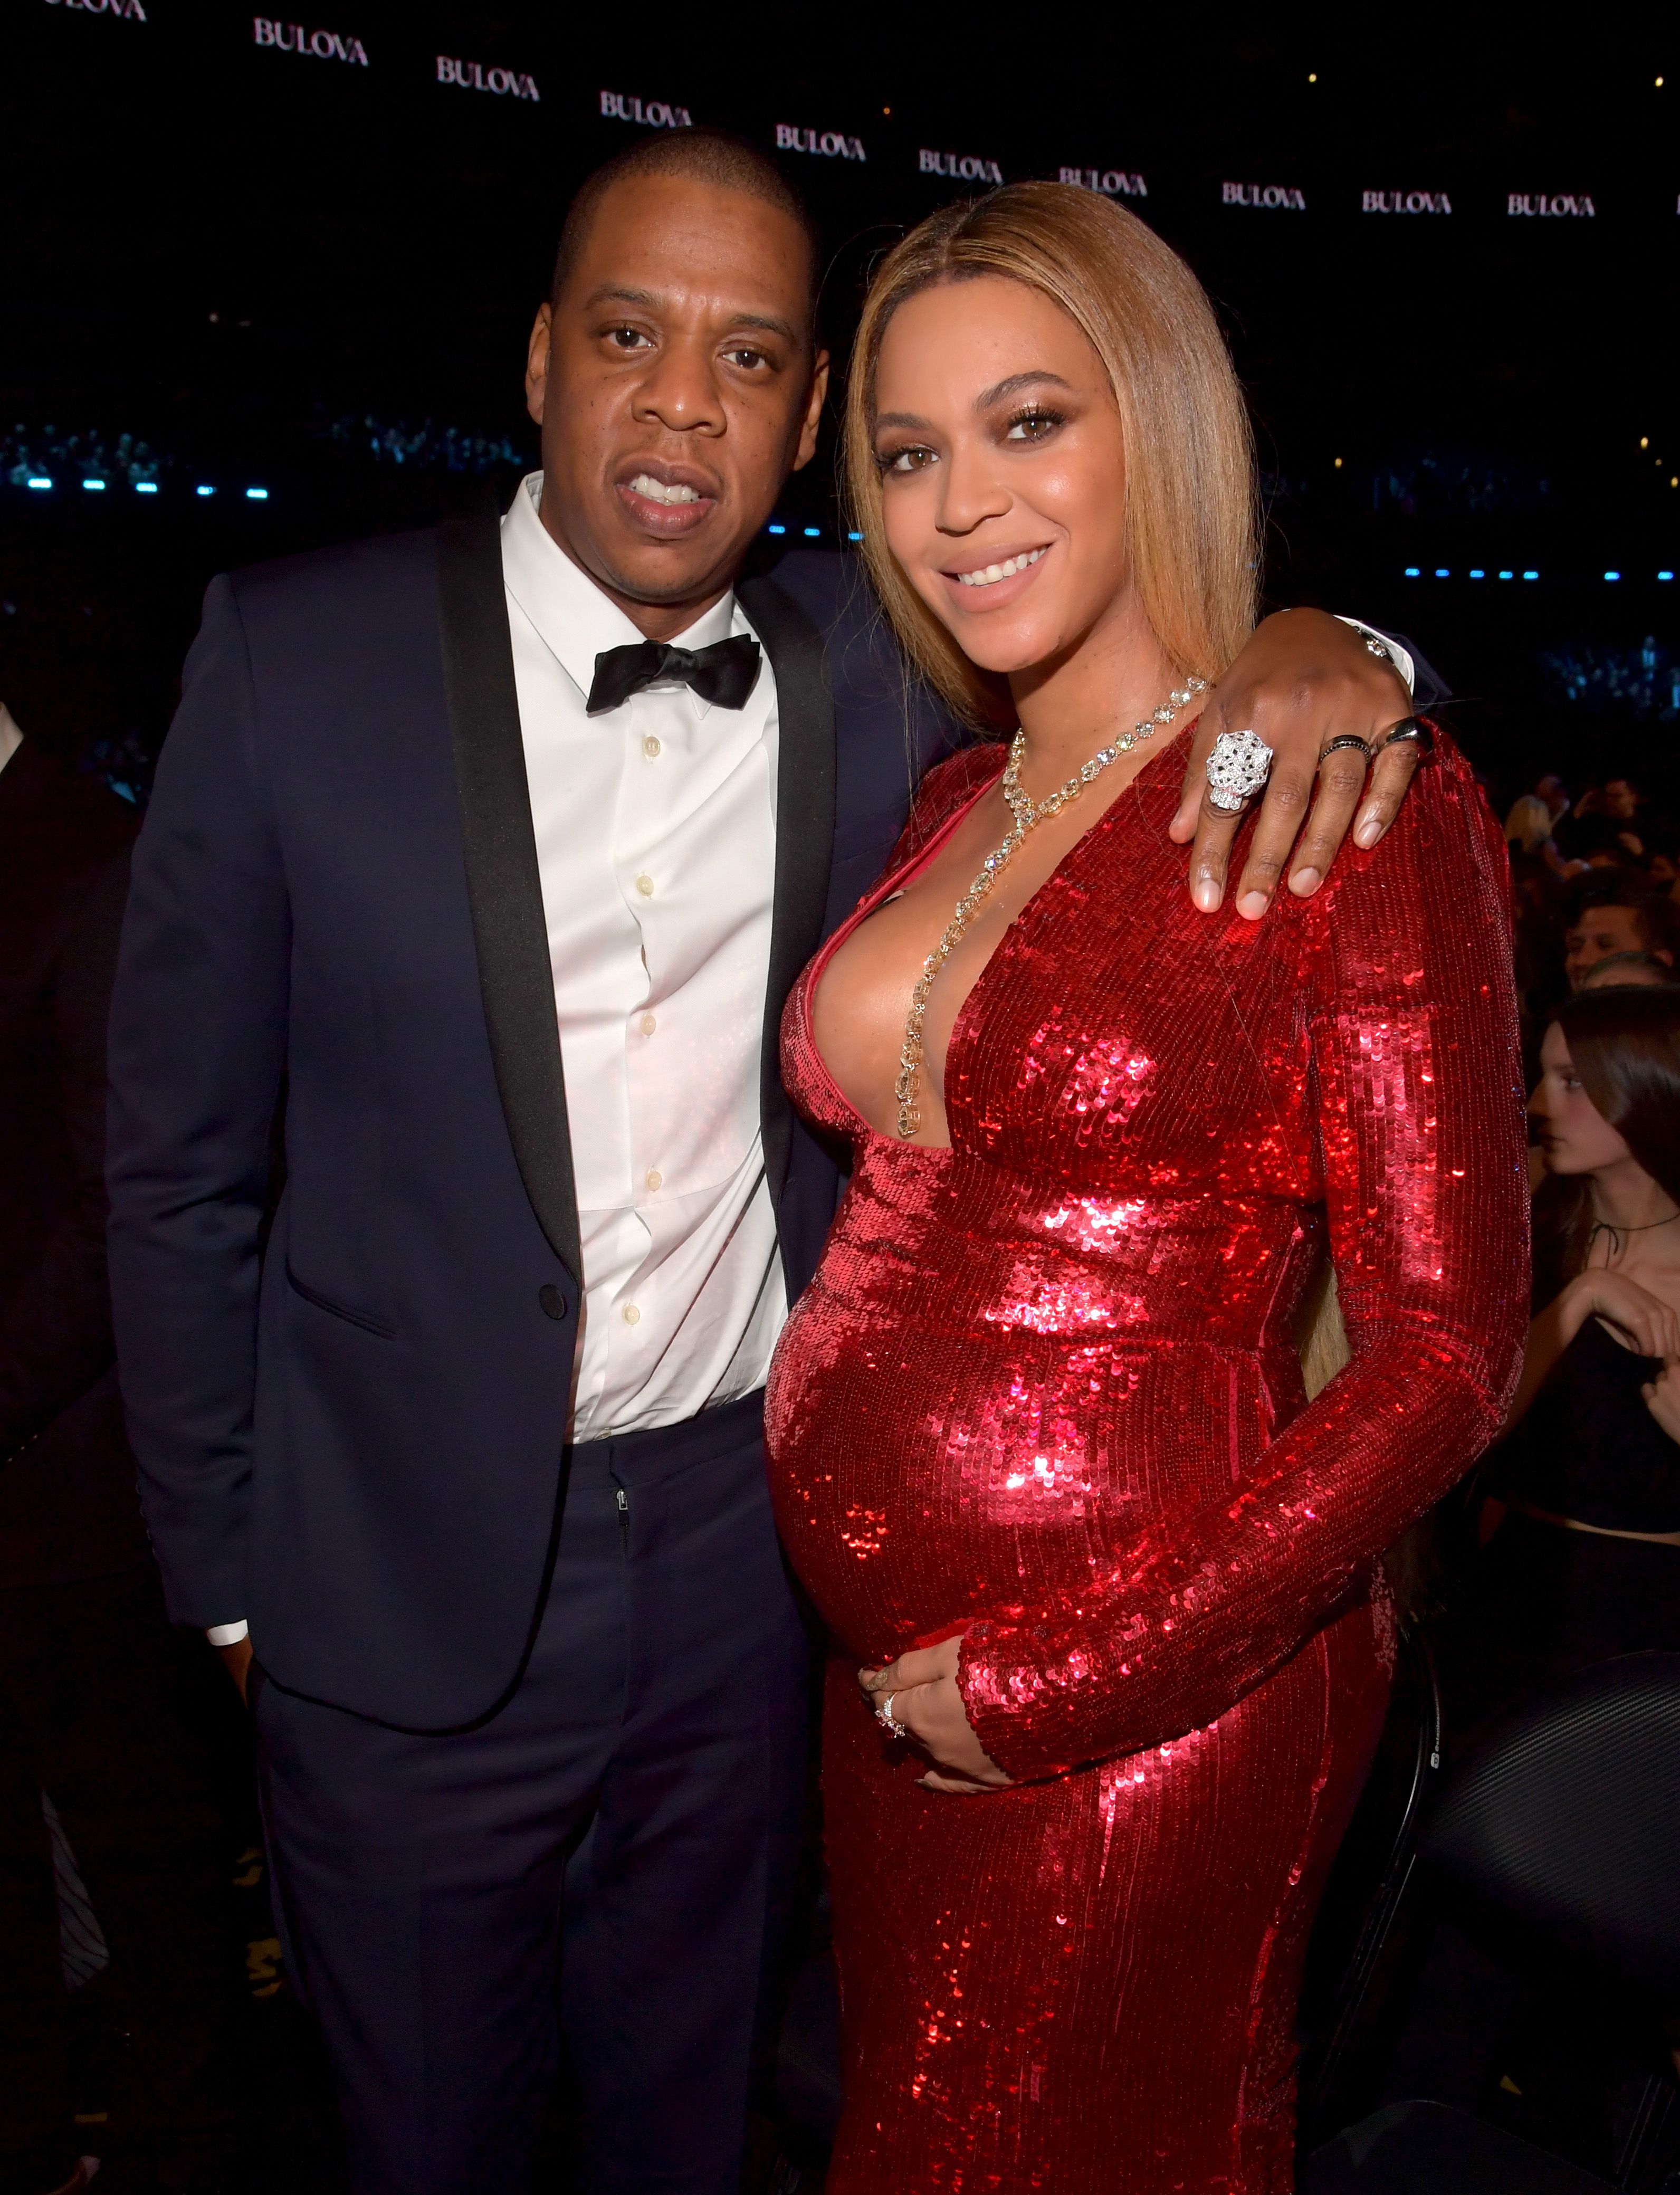 Why is it so easy to ignore that a 30year old JayZ being infatuated with an  18 year old Beyoncé isn't sick : r/blackladies